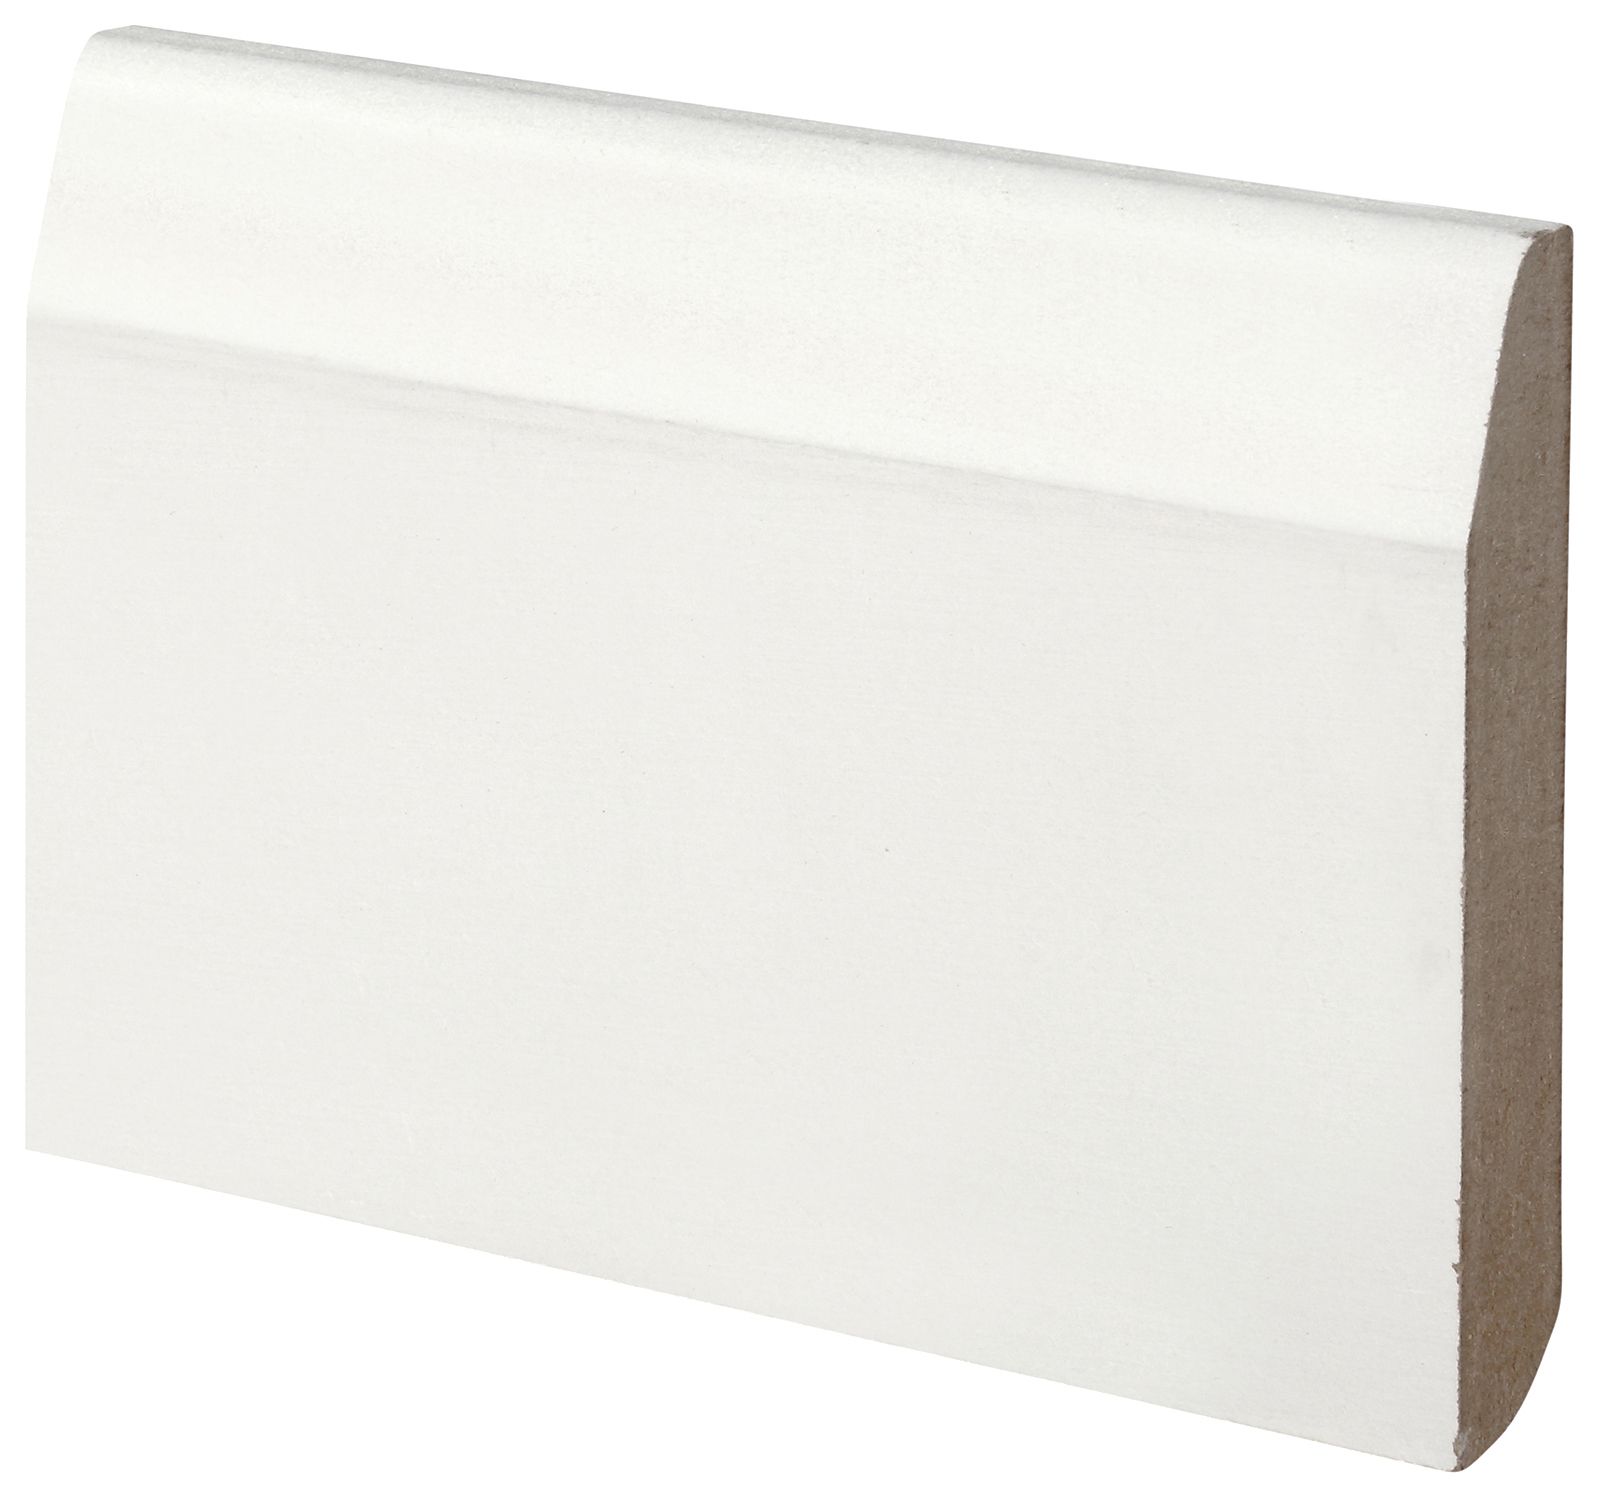 Image of Wickes Chamfered / Bullnose White MDF Skirting - 14.5 x 94 x 4200mm